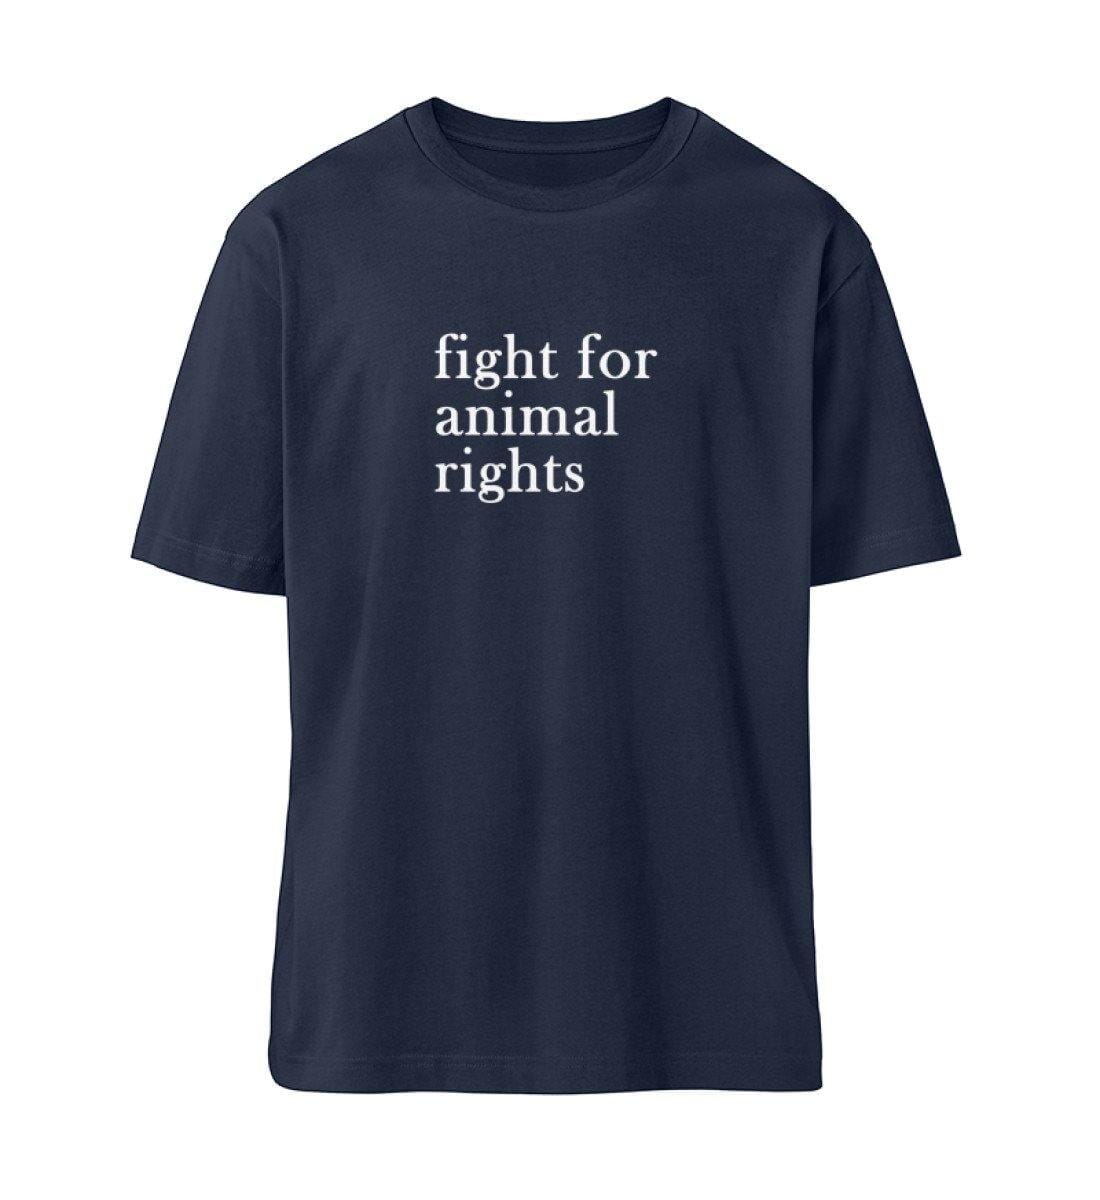 Fight for animal rights - Fuser Relaxed Shirt Fuser Oversized Shirt ST/ST Shirtee French Navy S 